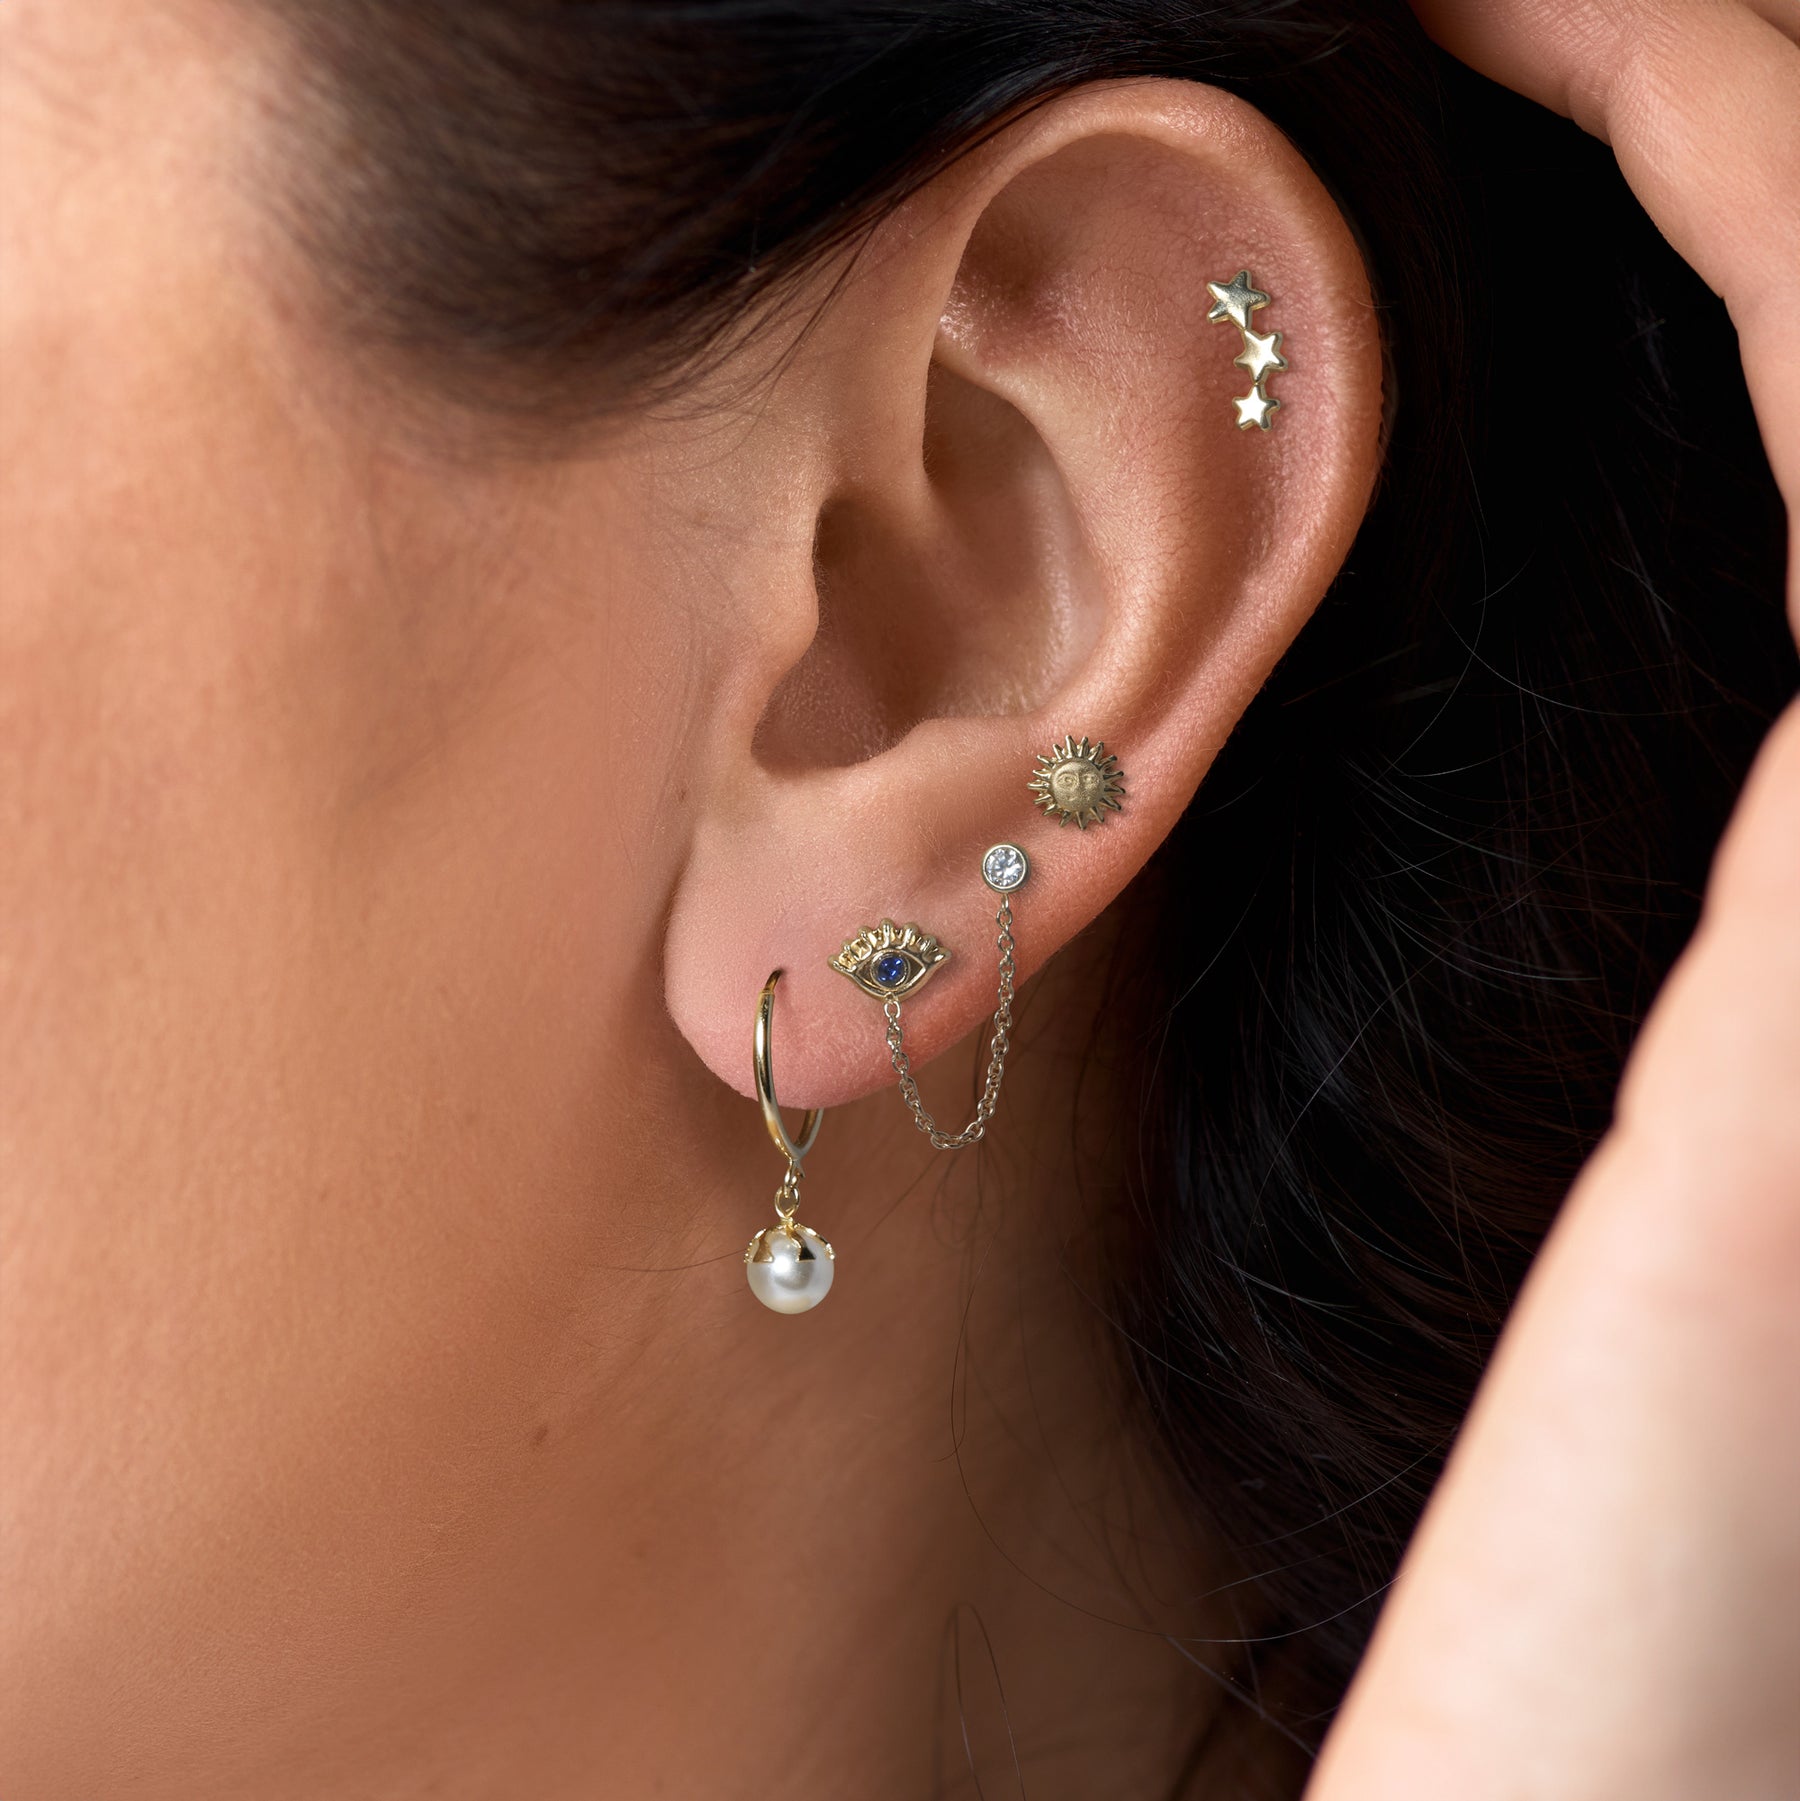 Close of an ear of a woman who is wearing our new 14k gold earrings.